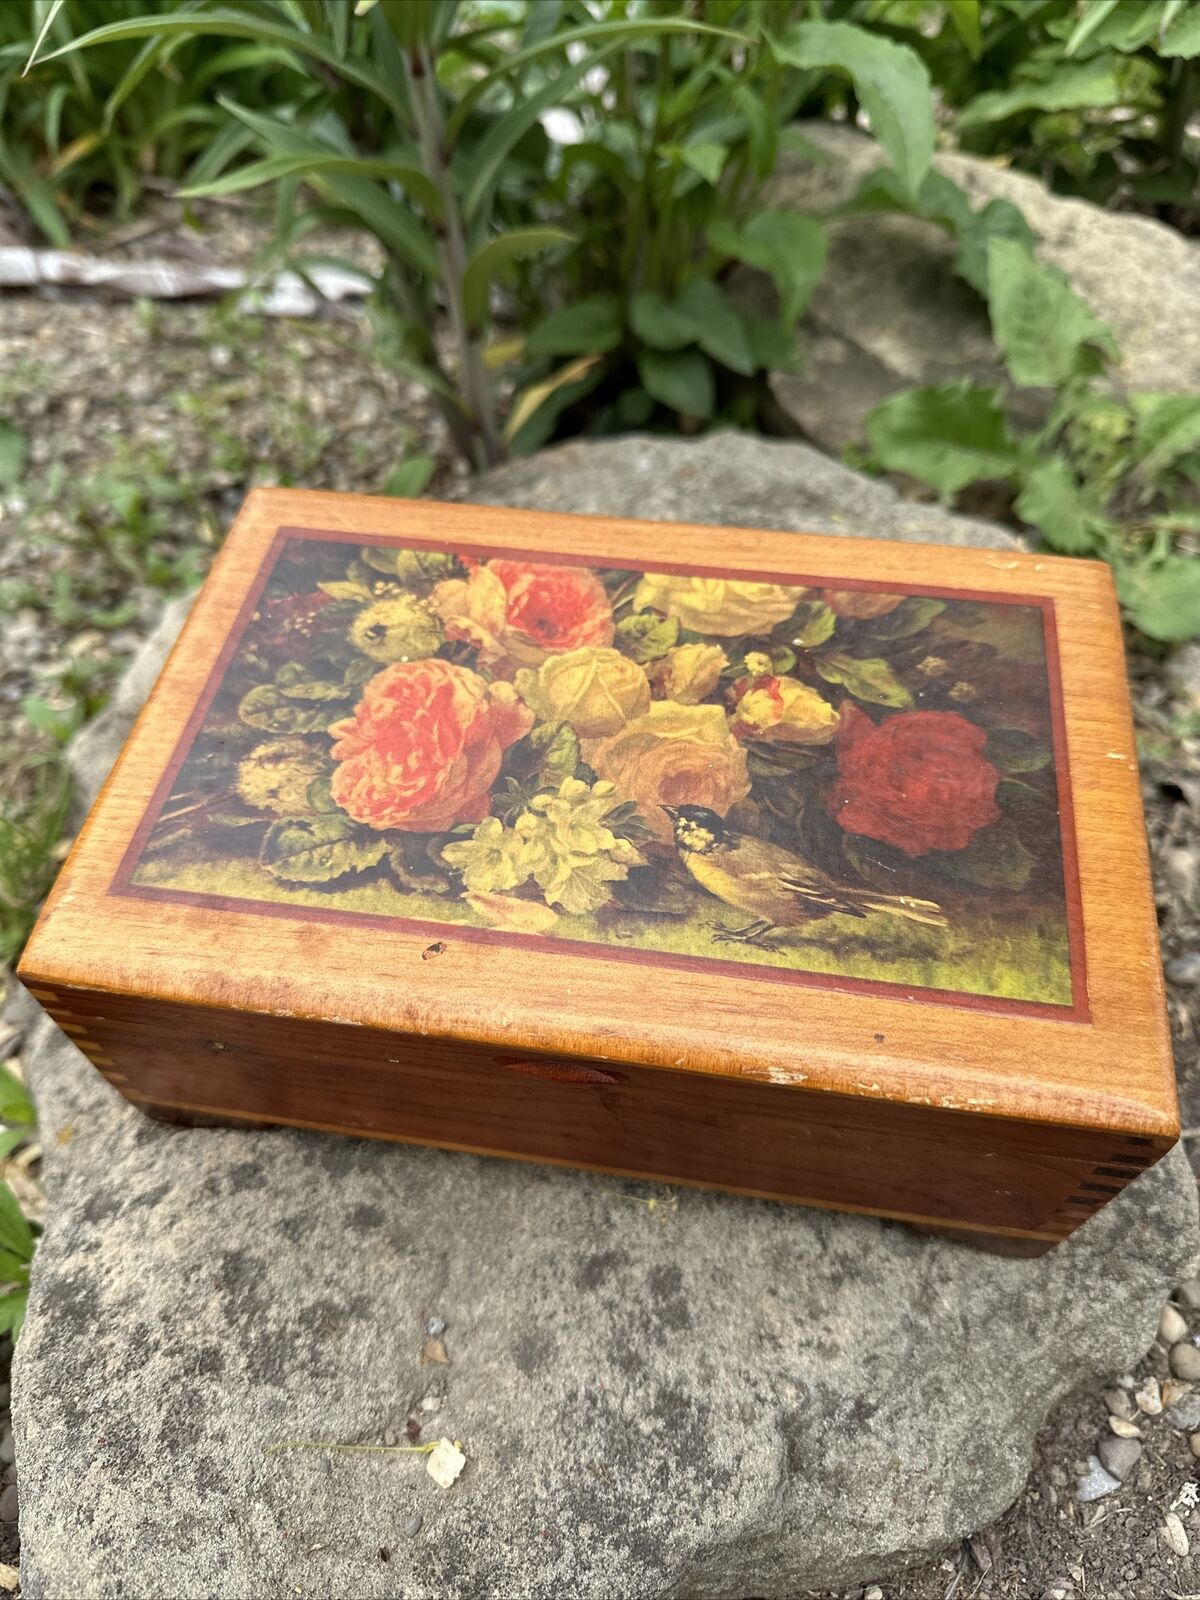 Vintage Wooden Trinket Box With Bird And Flowers